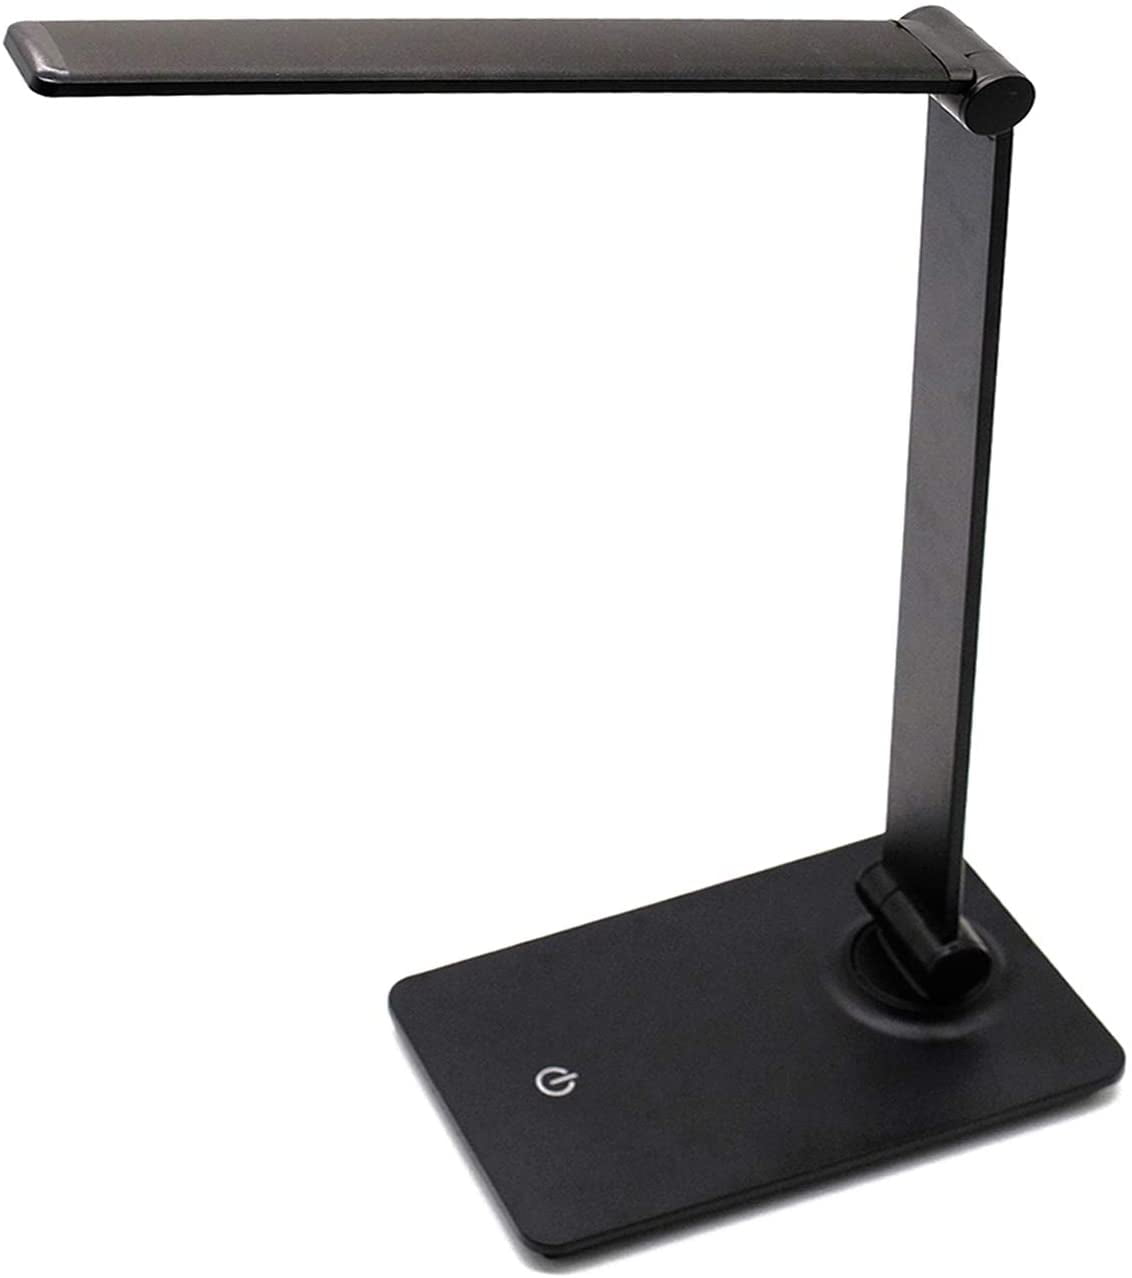 Sleep Mode LED Desk Lamp 5V 2.4A USB Charging Port MoKo Smart Touch Stylish Metal Table Lamp Space Gray Memory Function Rotatable Home Office Lamp with Stepless Brightness/Color Temperature